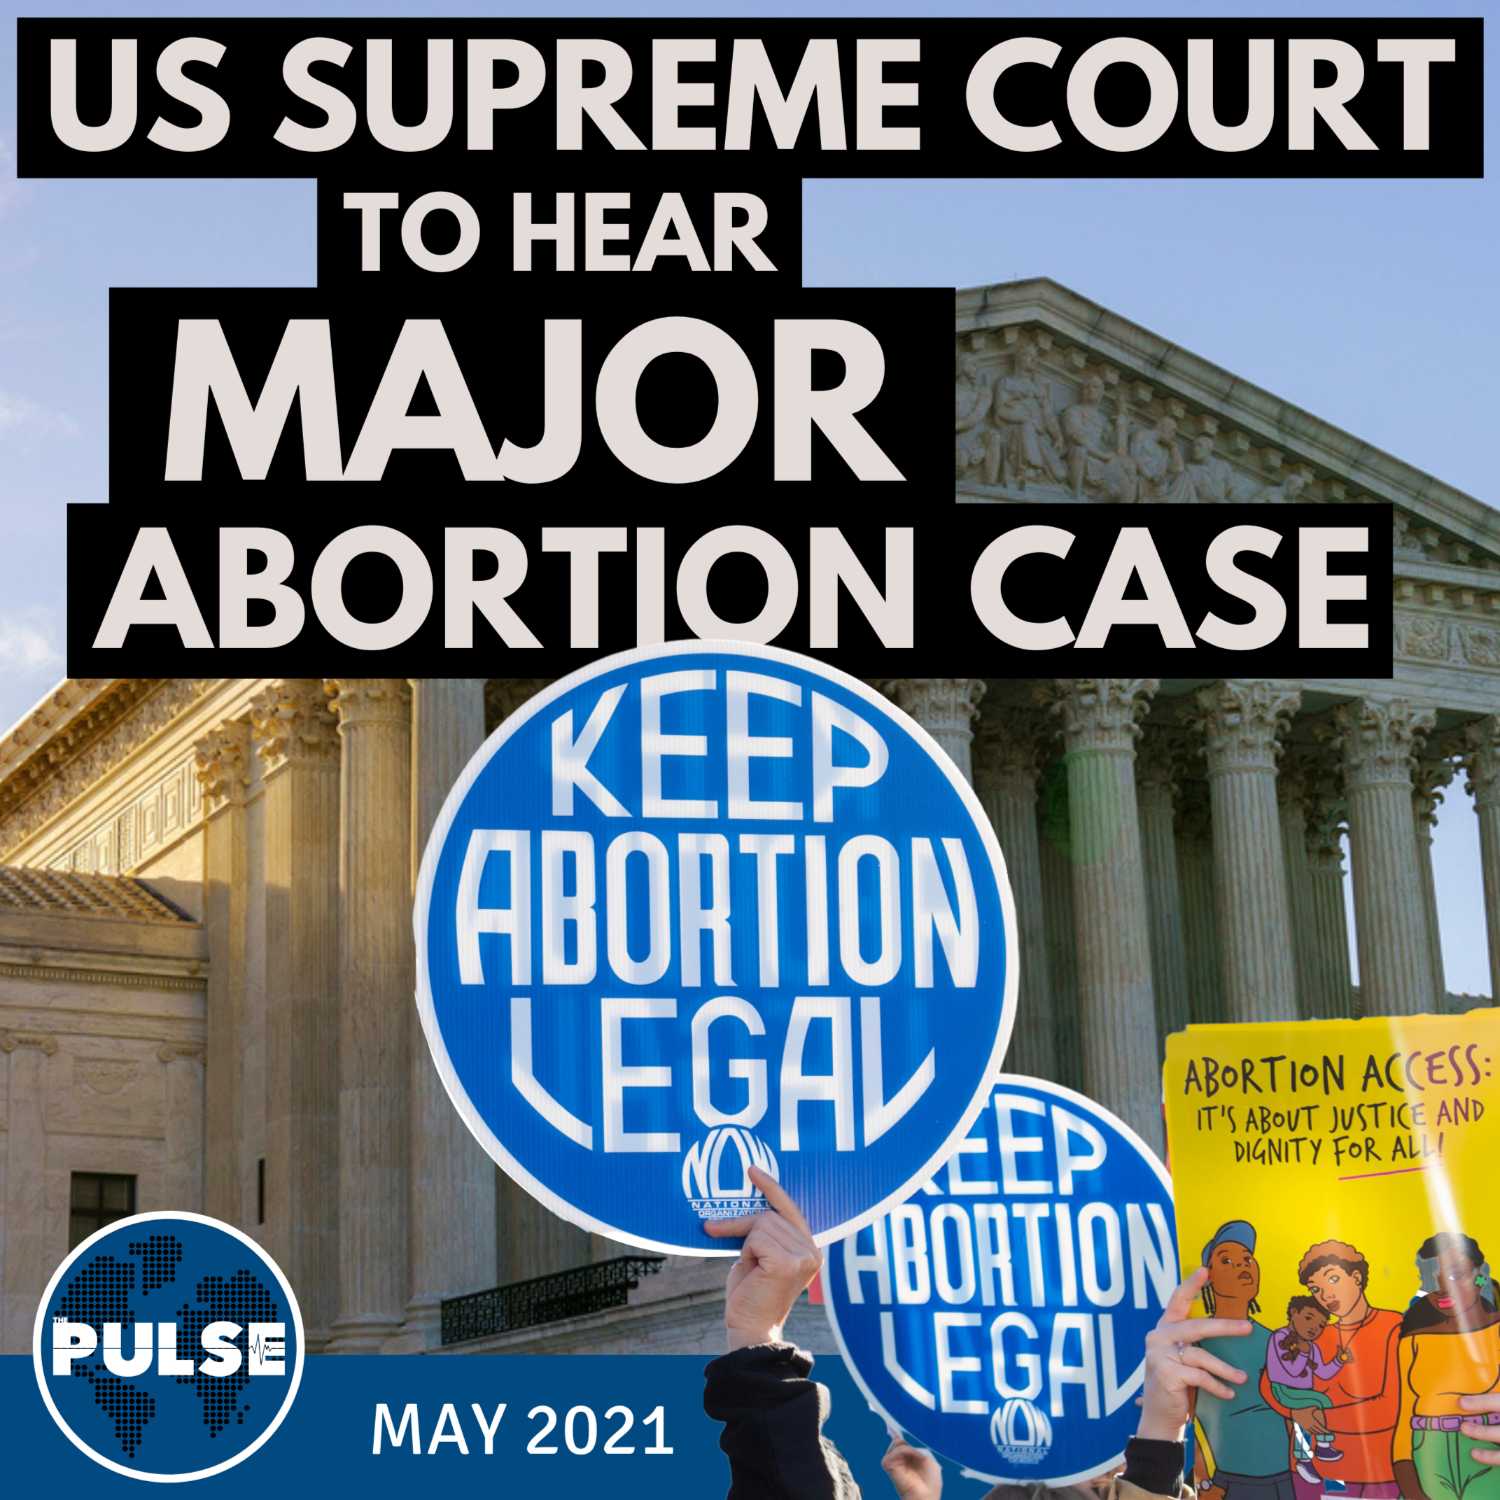 PULSE: US Supreme Court is Set to Hear a Major Abortion Case (and other news items)